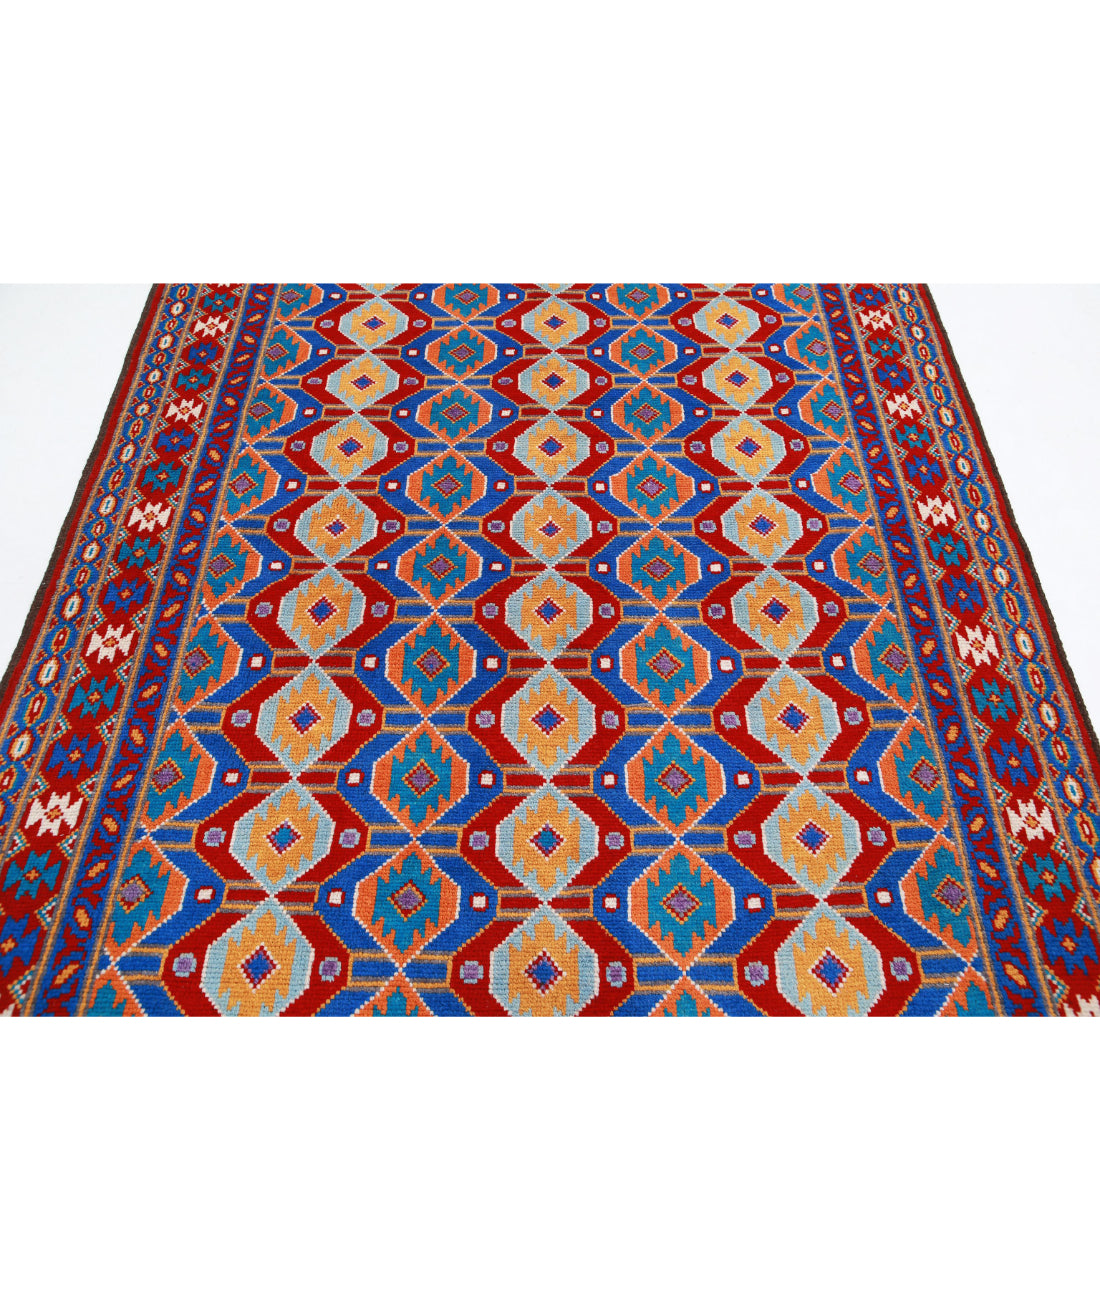 Revival 5'9'' X 8'1'' Hand-Knotted Wool Rug 5'9'' x 8'1'' (173 X 243) / Red / Blue